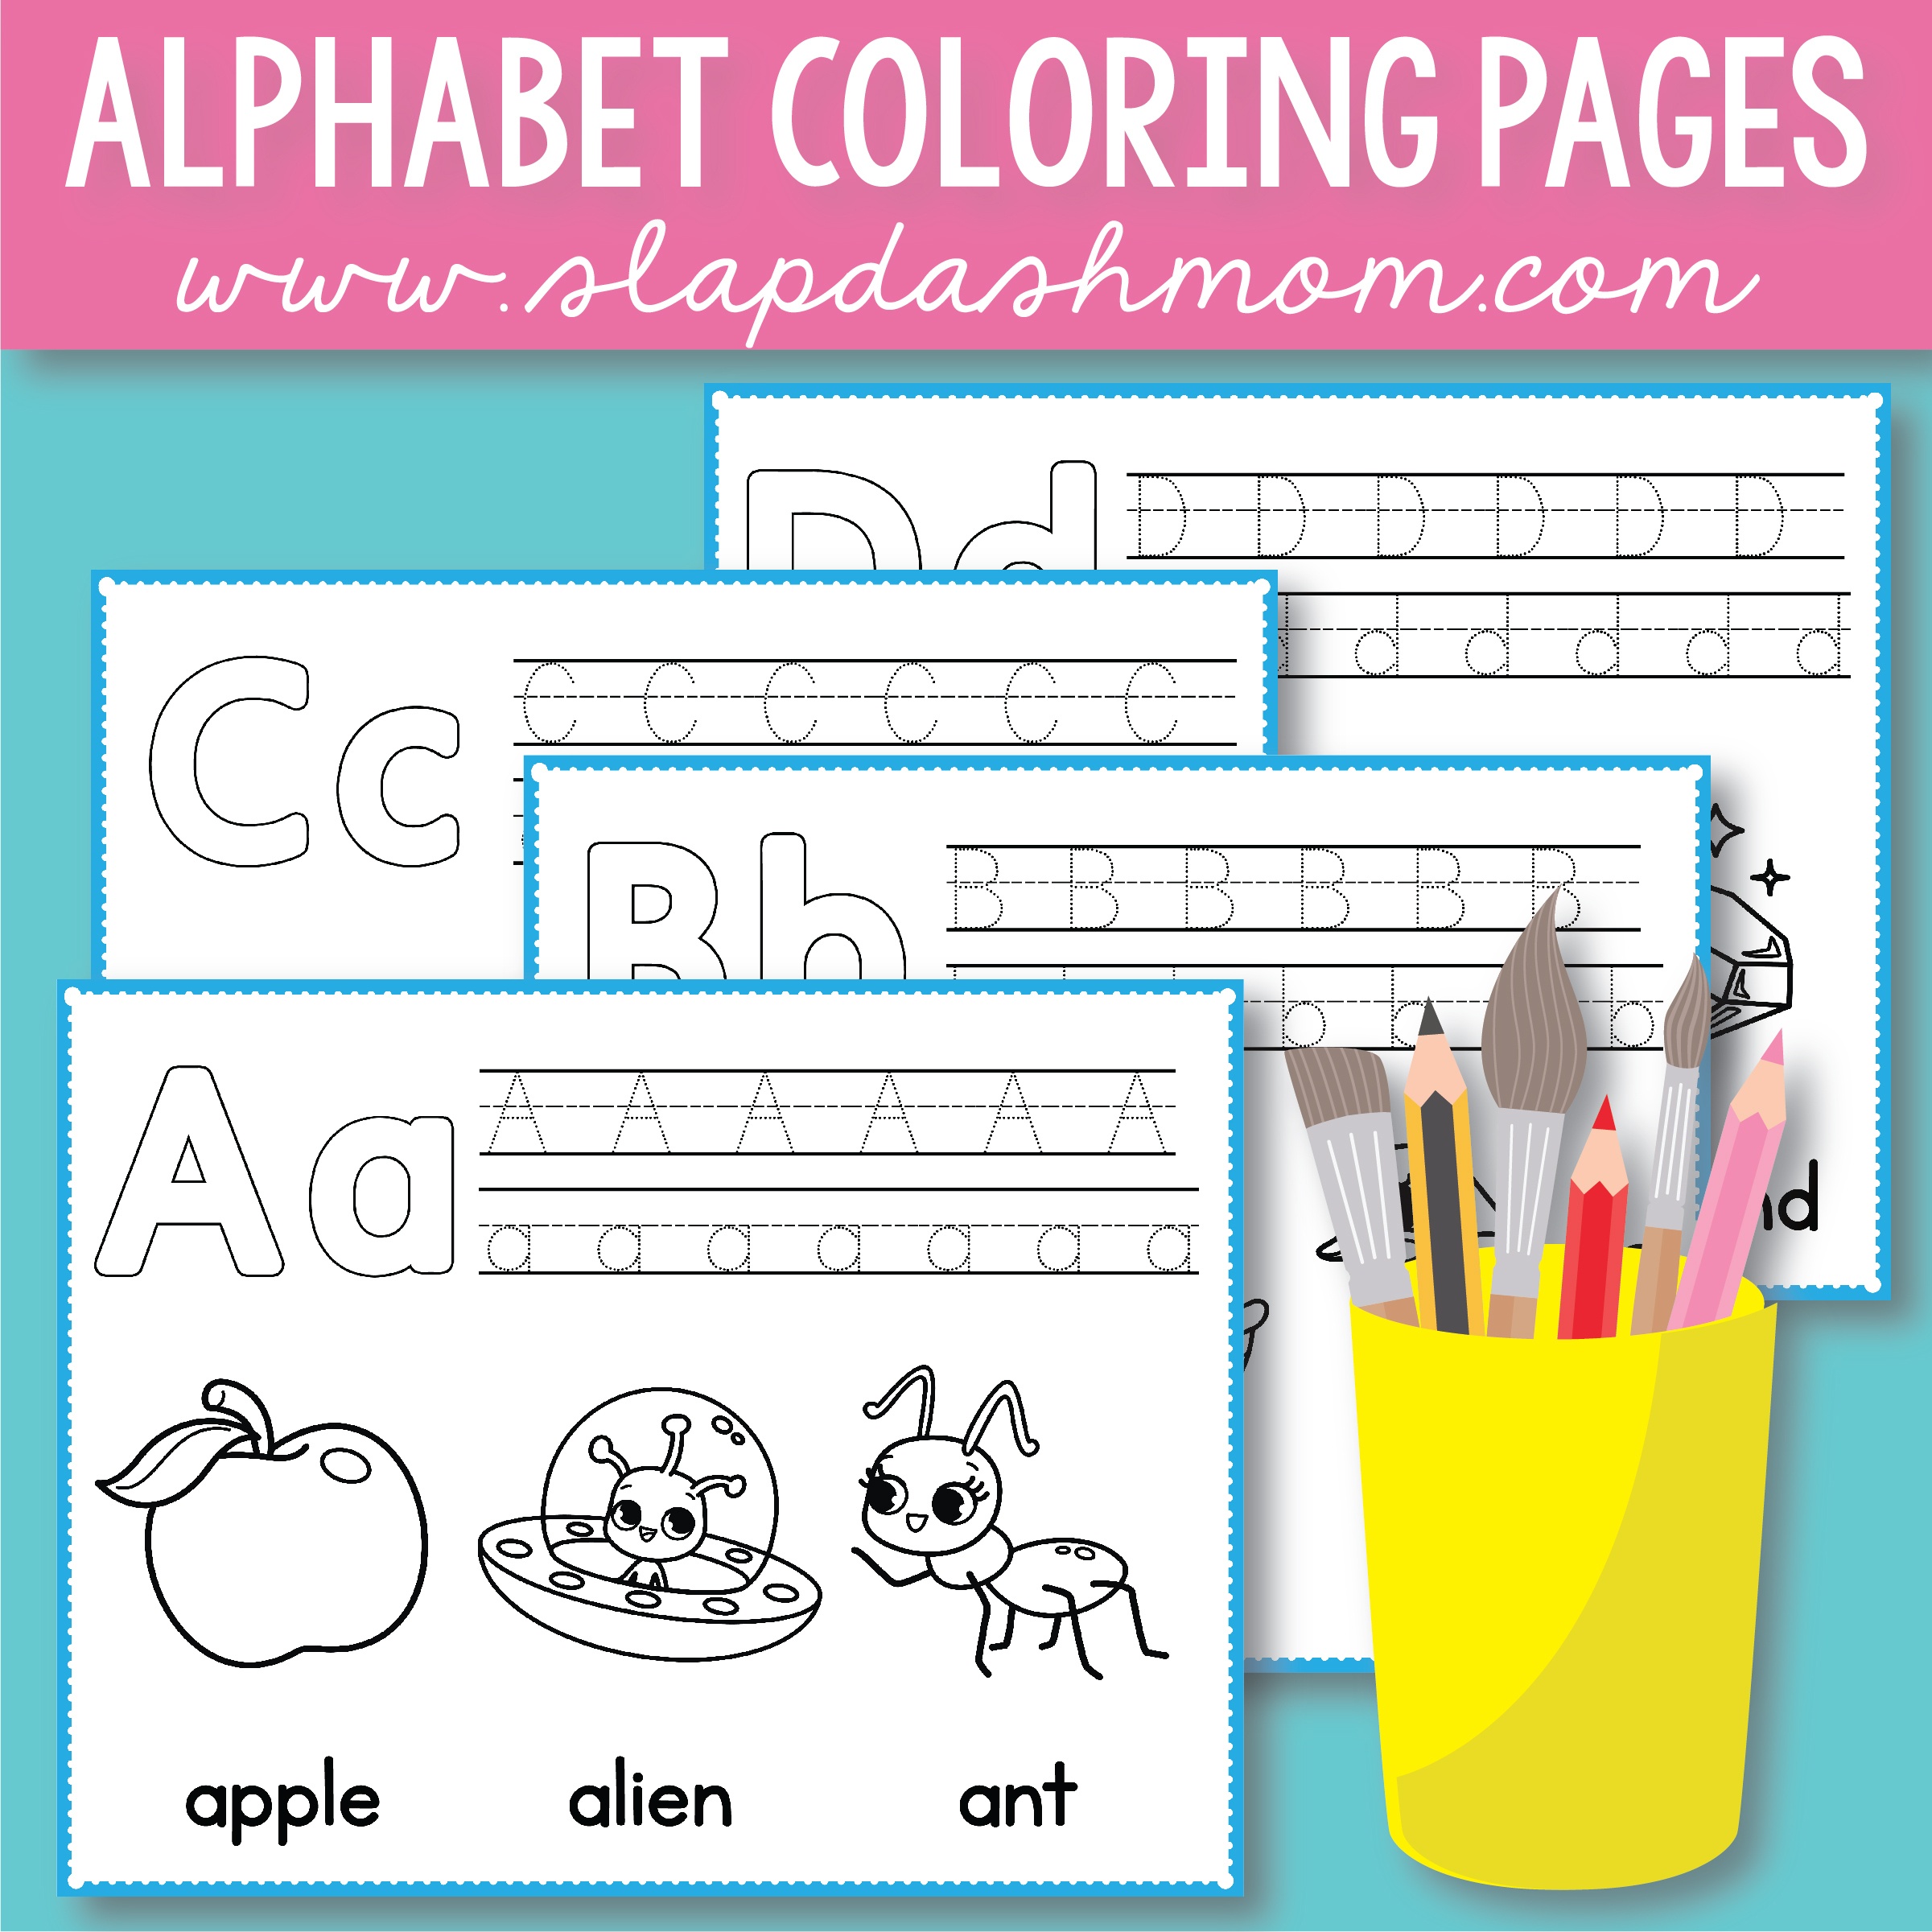 Free Alphabet Coloring Pages – Preschool Printables – Slap Dash Mom - Free Printable Preschool Alphabet Coloring Pages